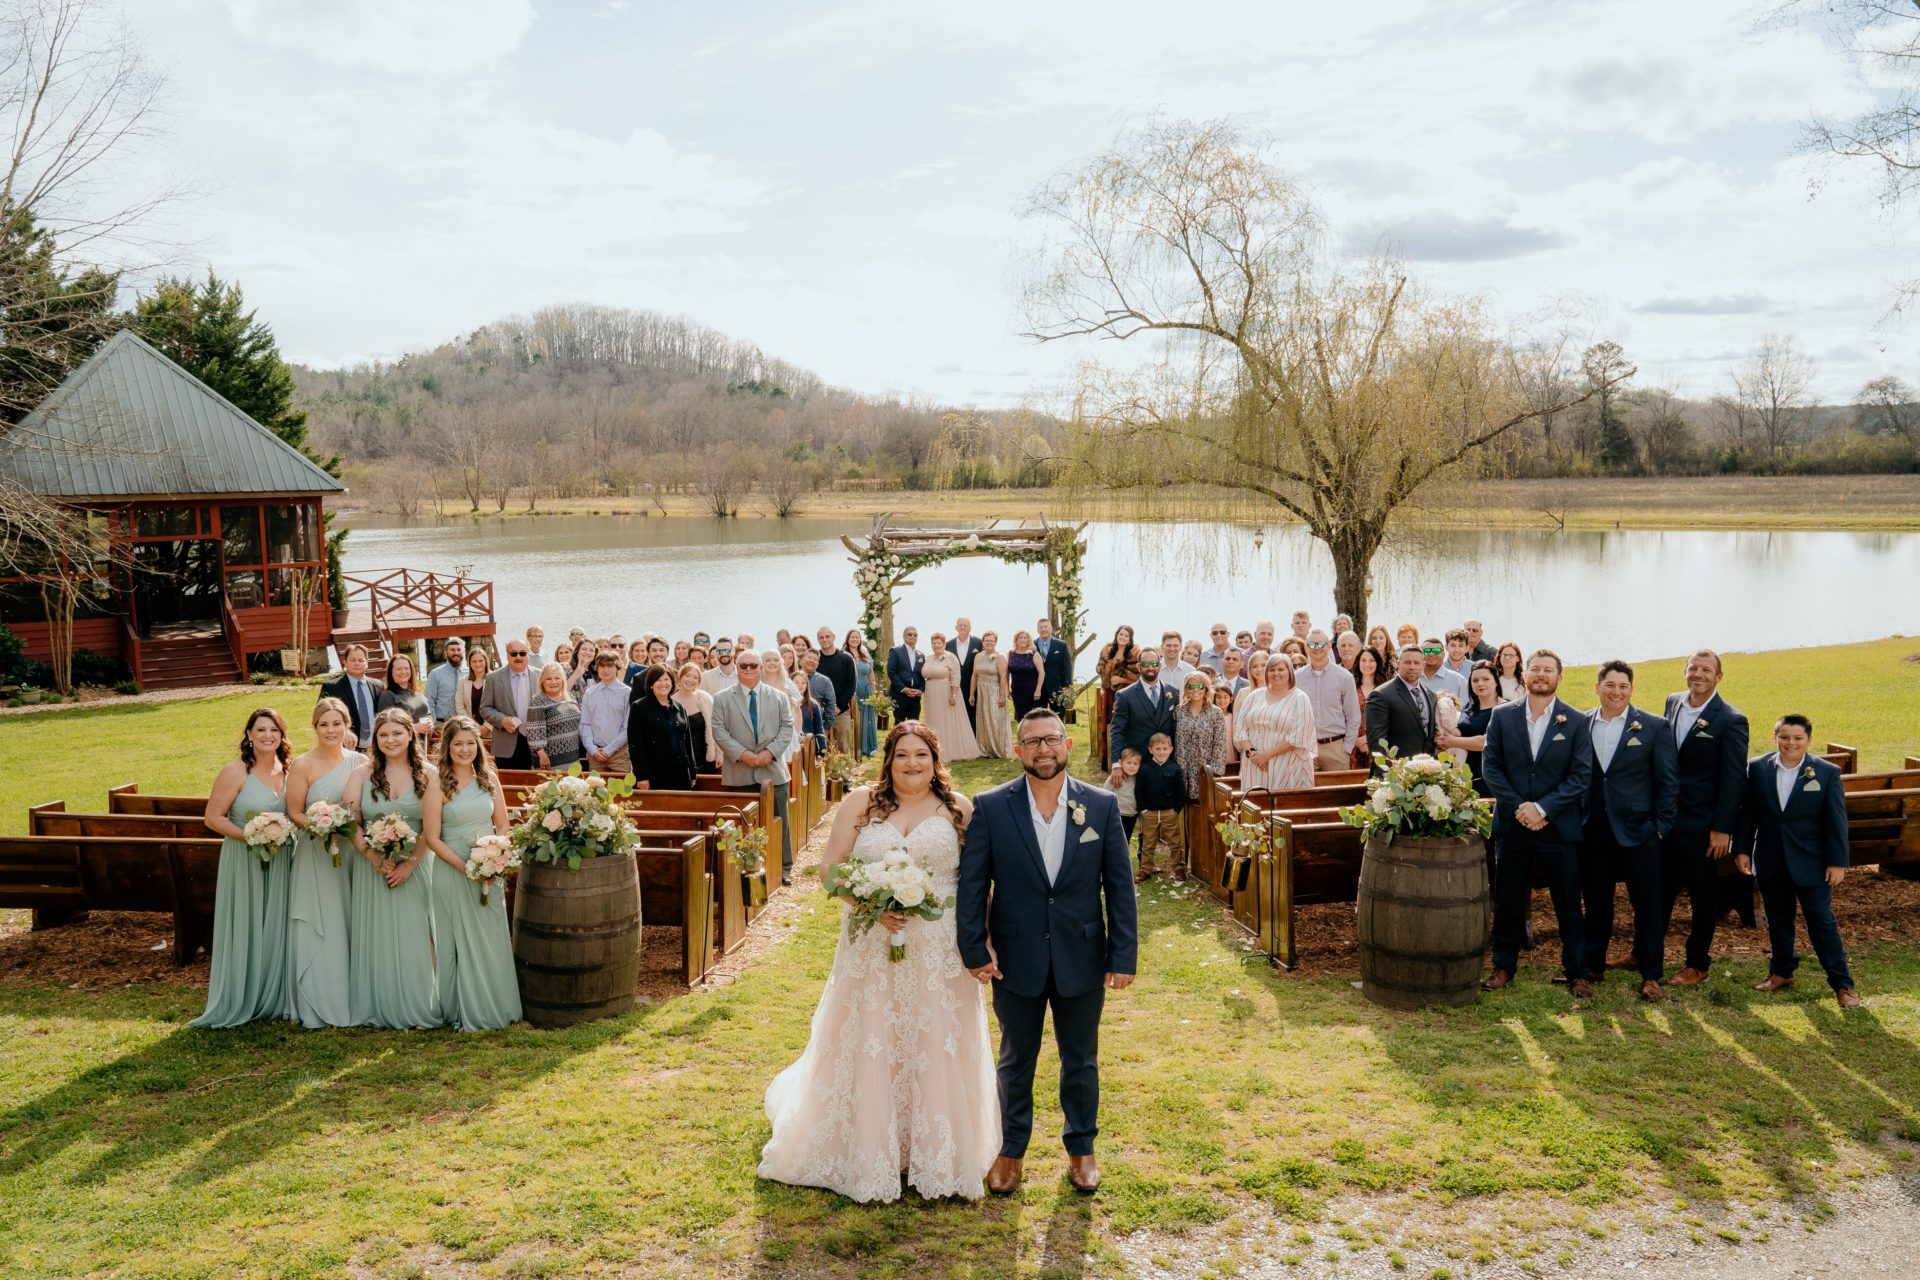 Planning for Last Minute Guests | Spring Lake Events | Rockmart, GA